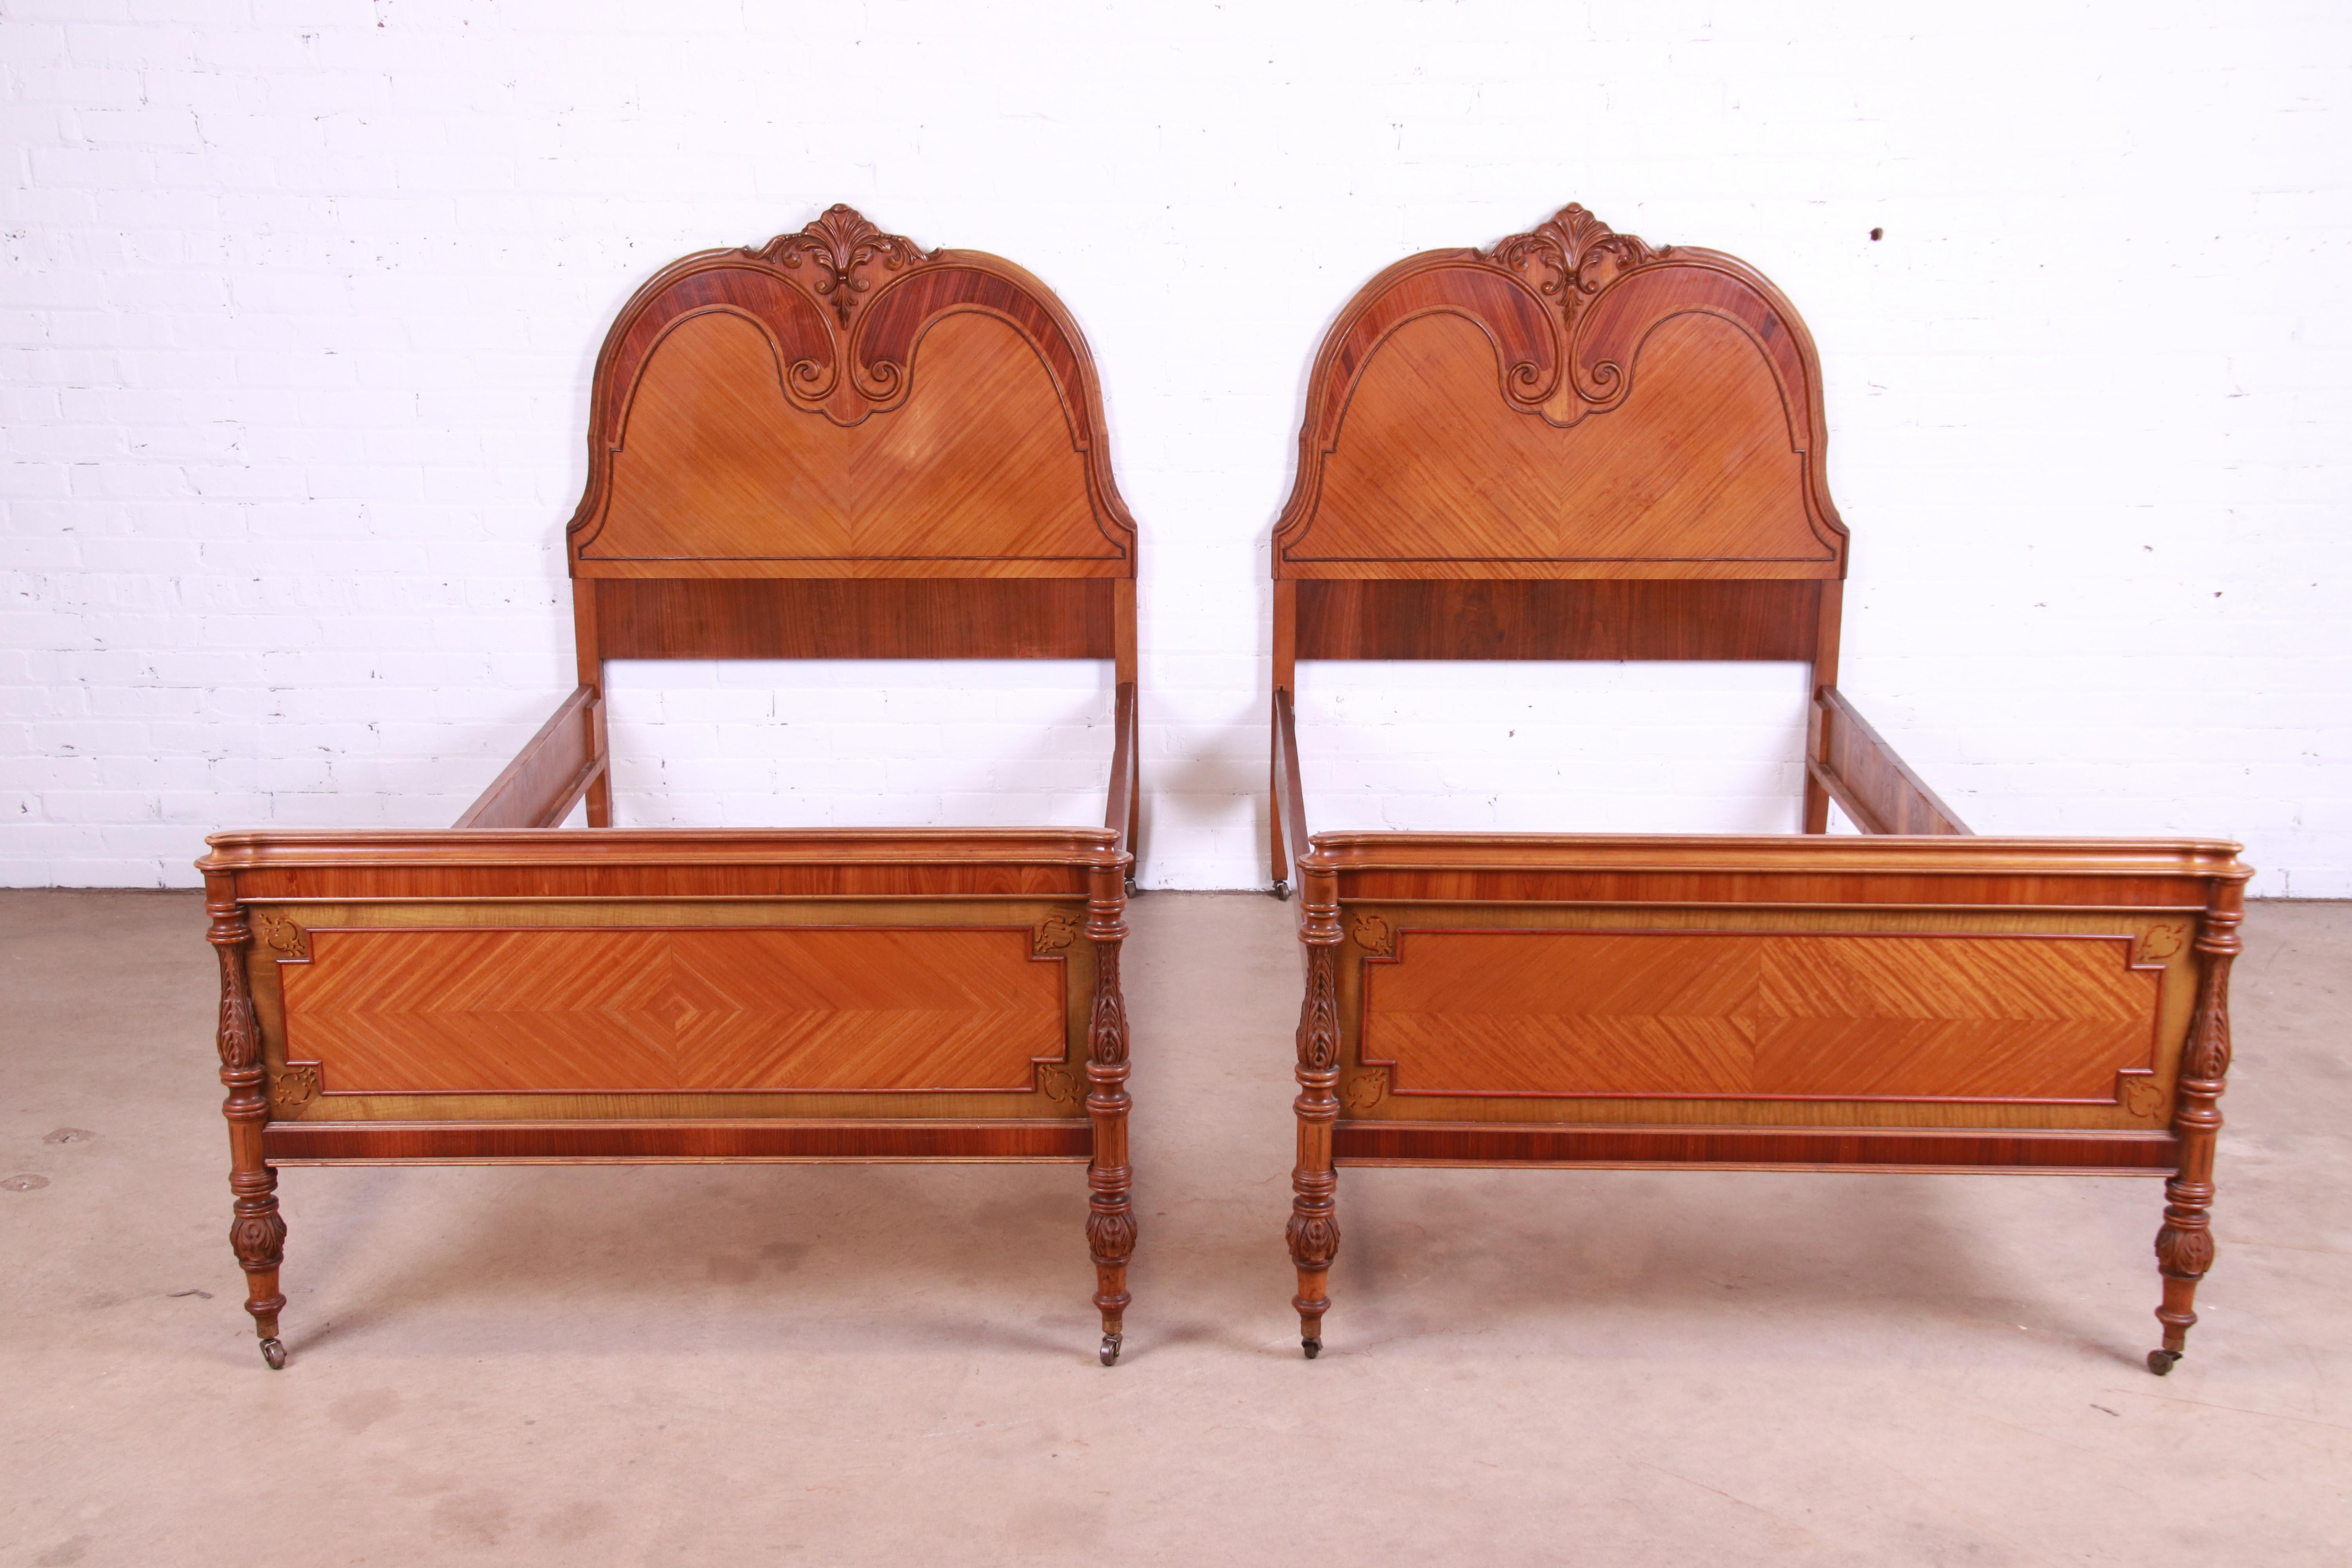 Early 20th Century French Art Deco Satinwood and Carved Walnut Twin Beds, Circa 1920s